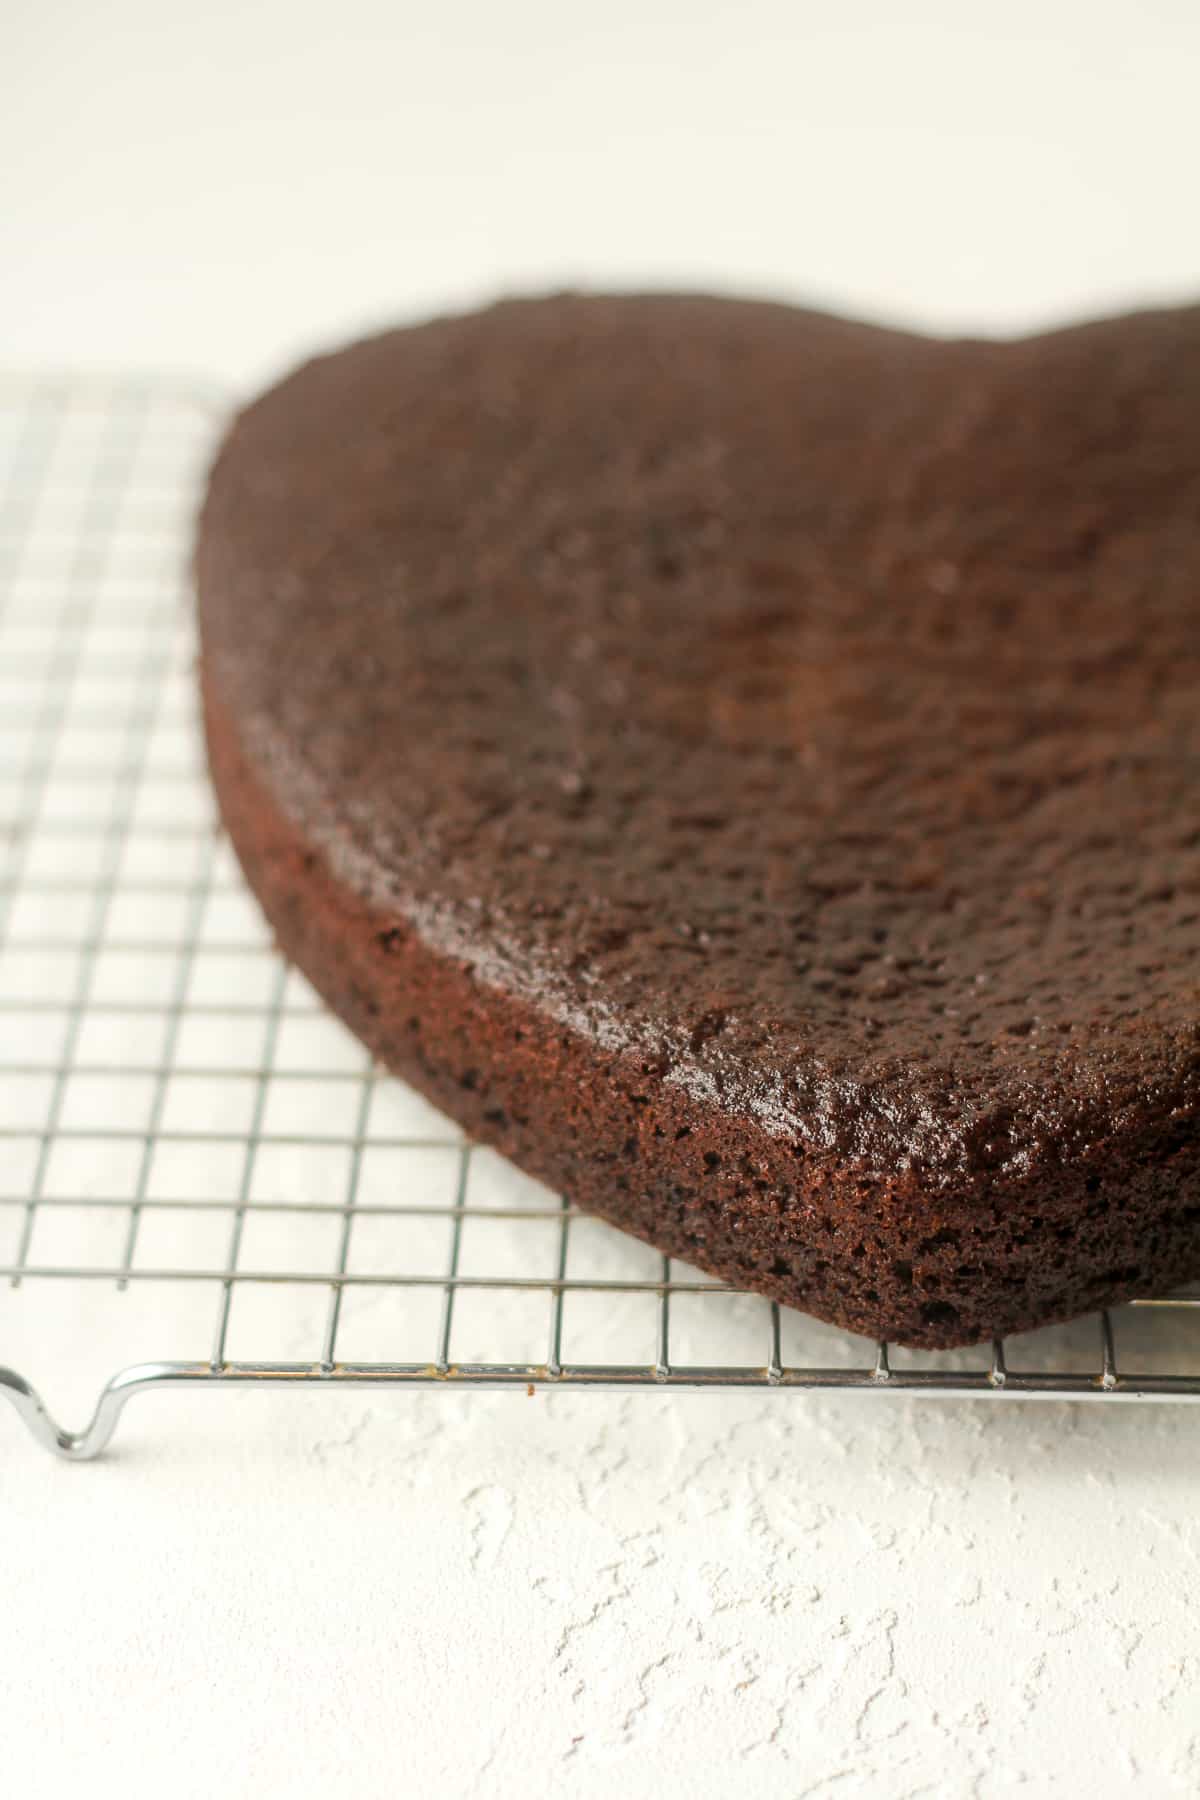 Side view of a chocolate heart cake.